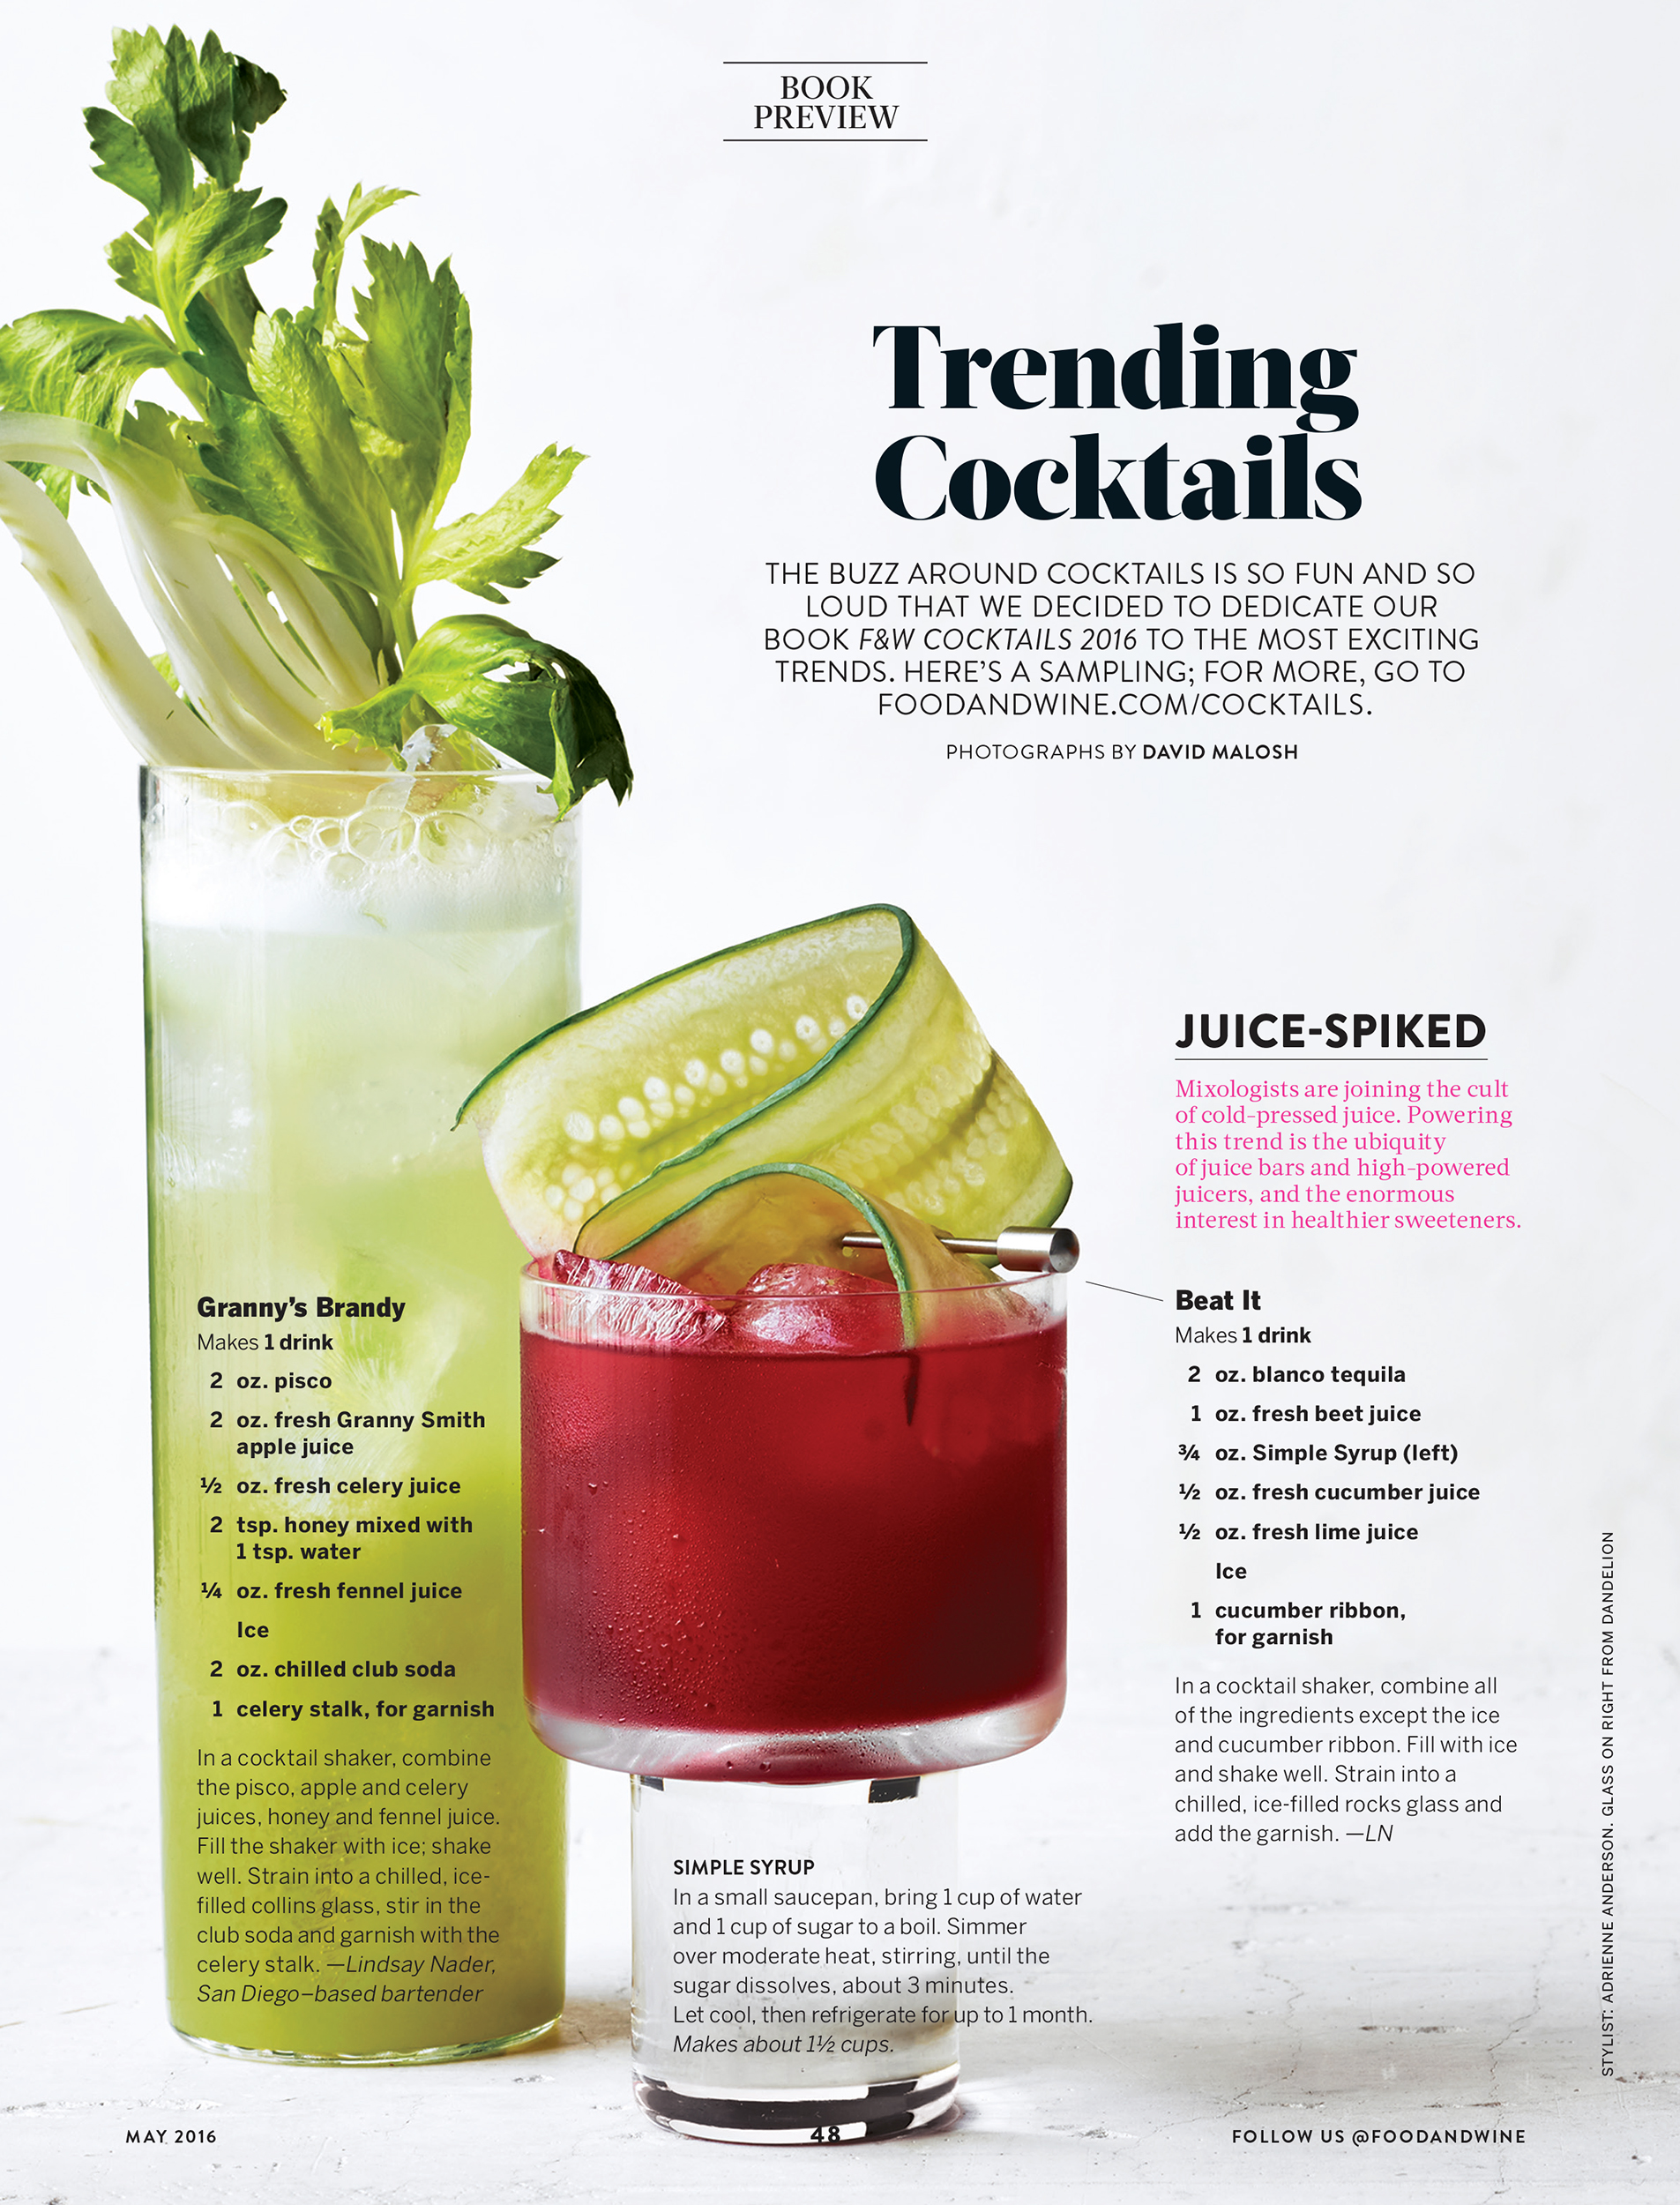 048_0516_Cocktail_Book_Preview-1.jpg